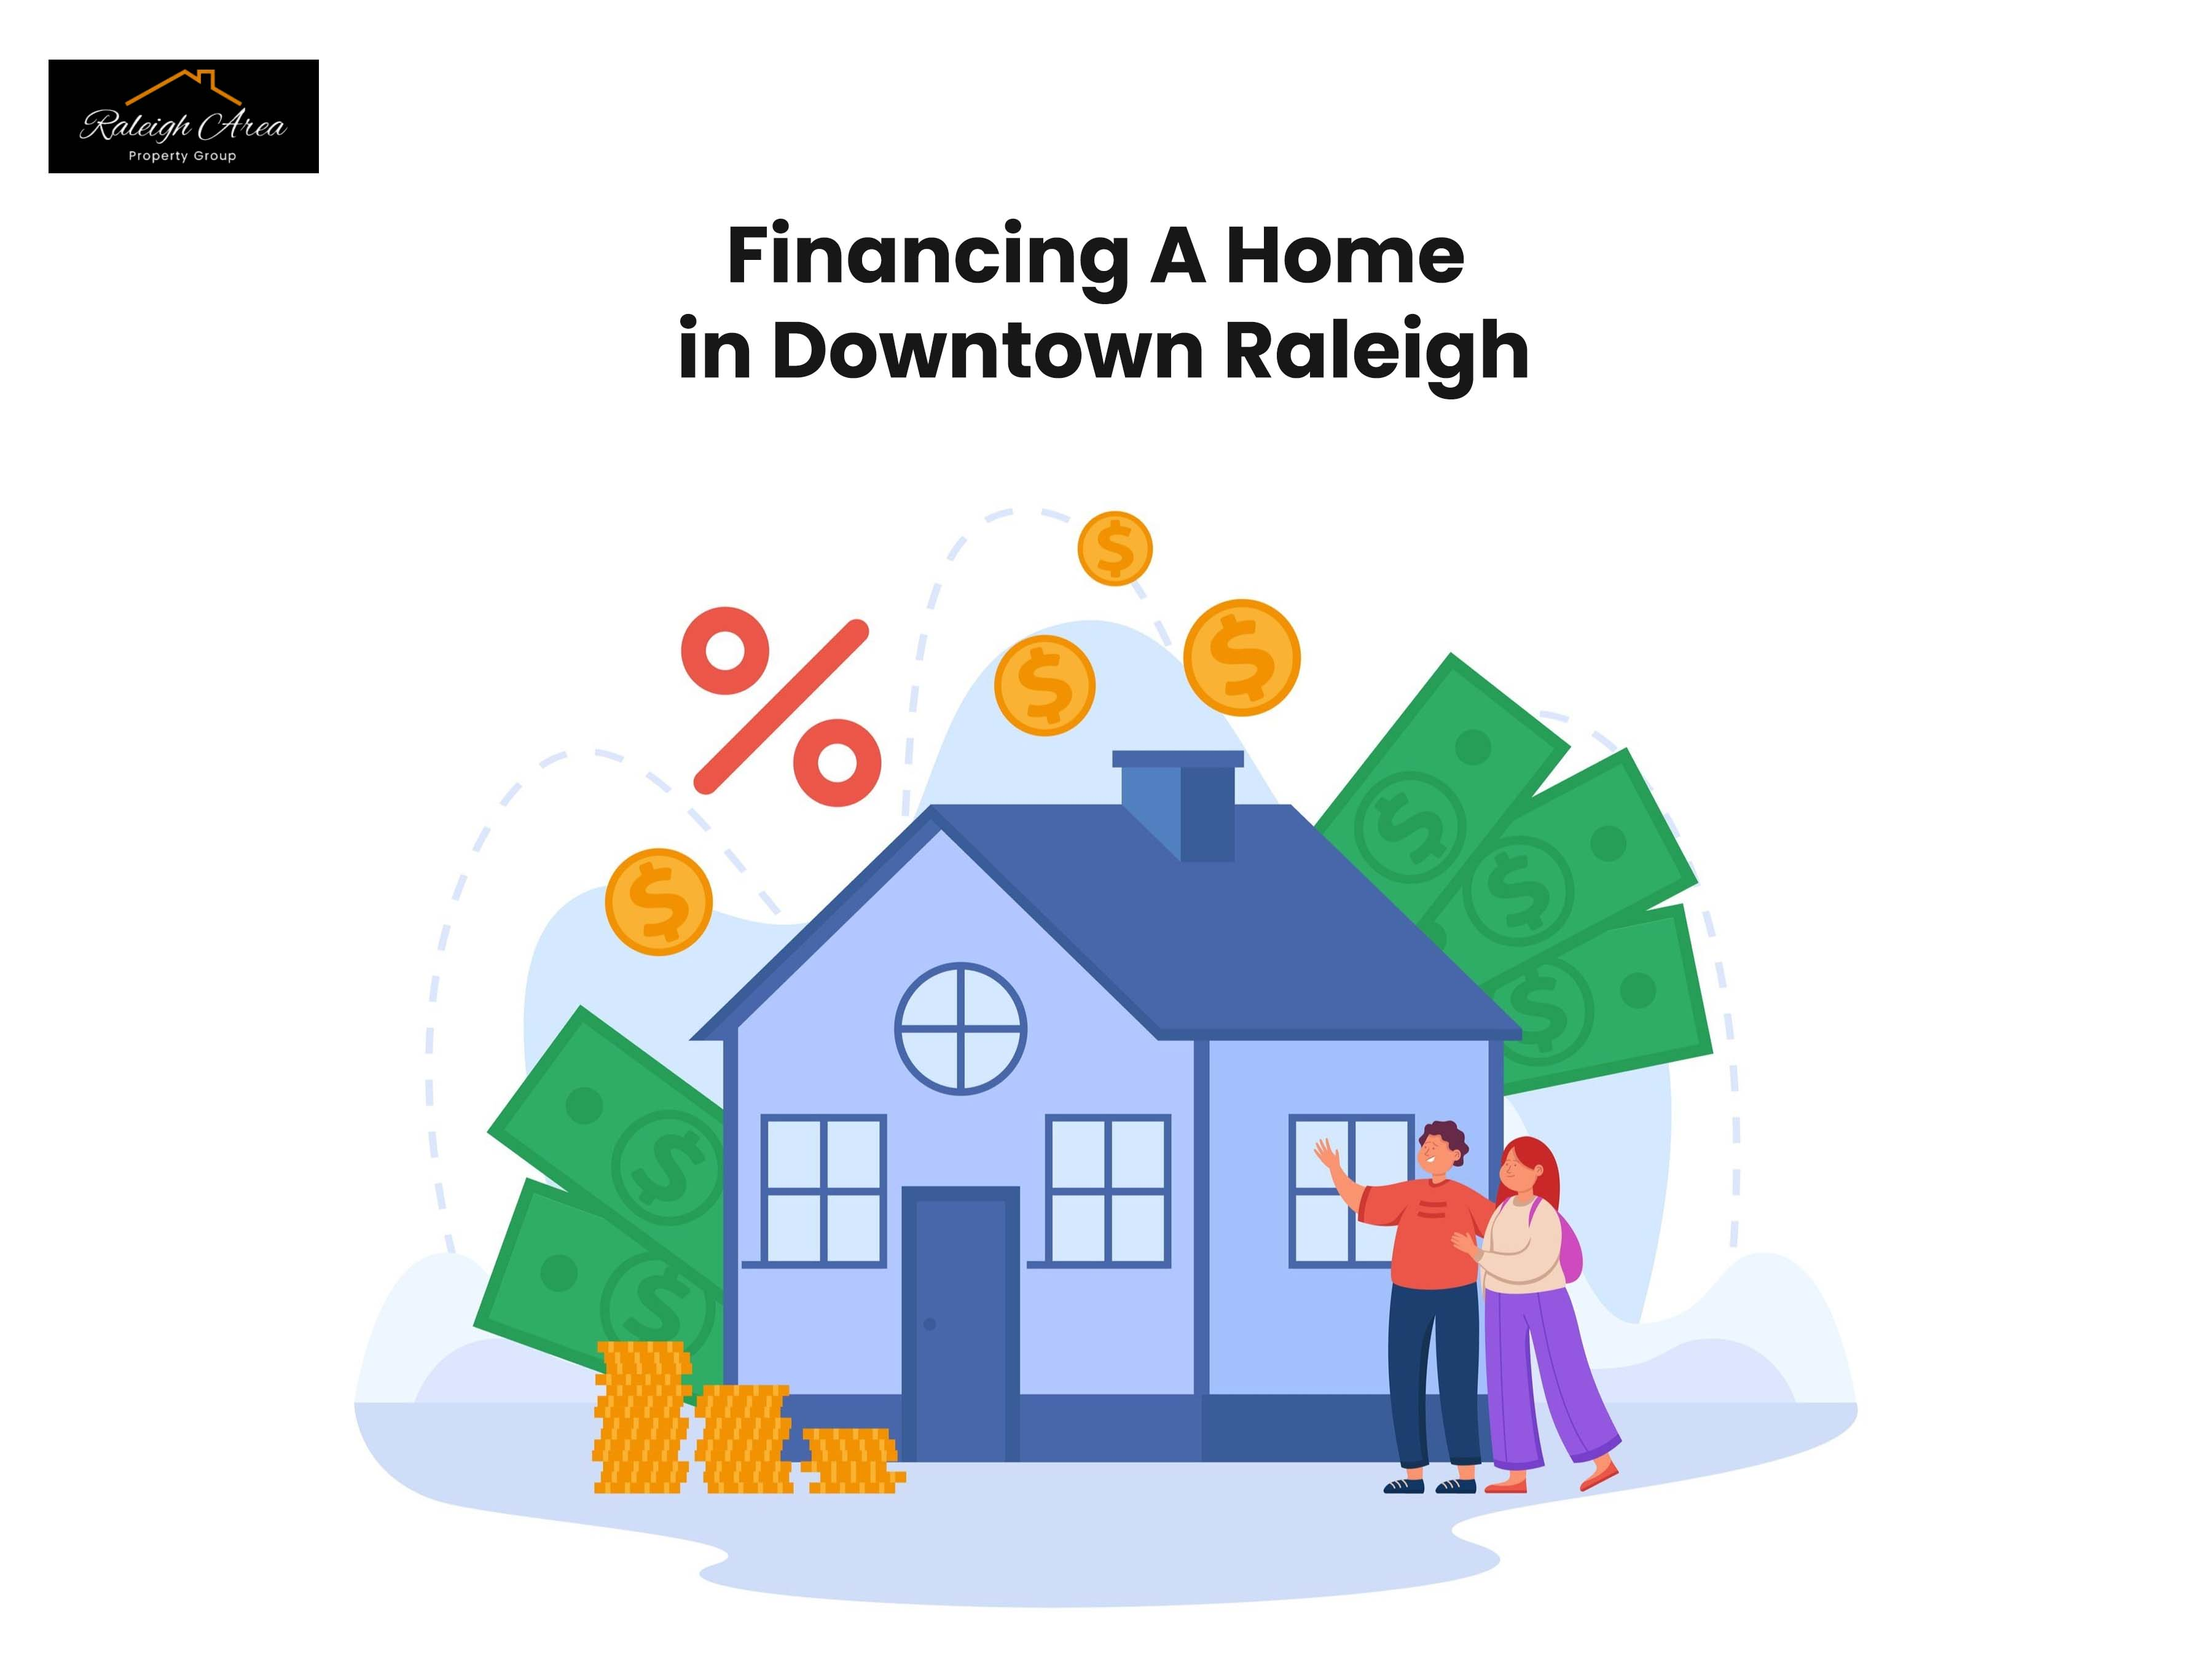 Financing A Home in Downtown Raleigh